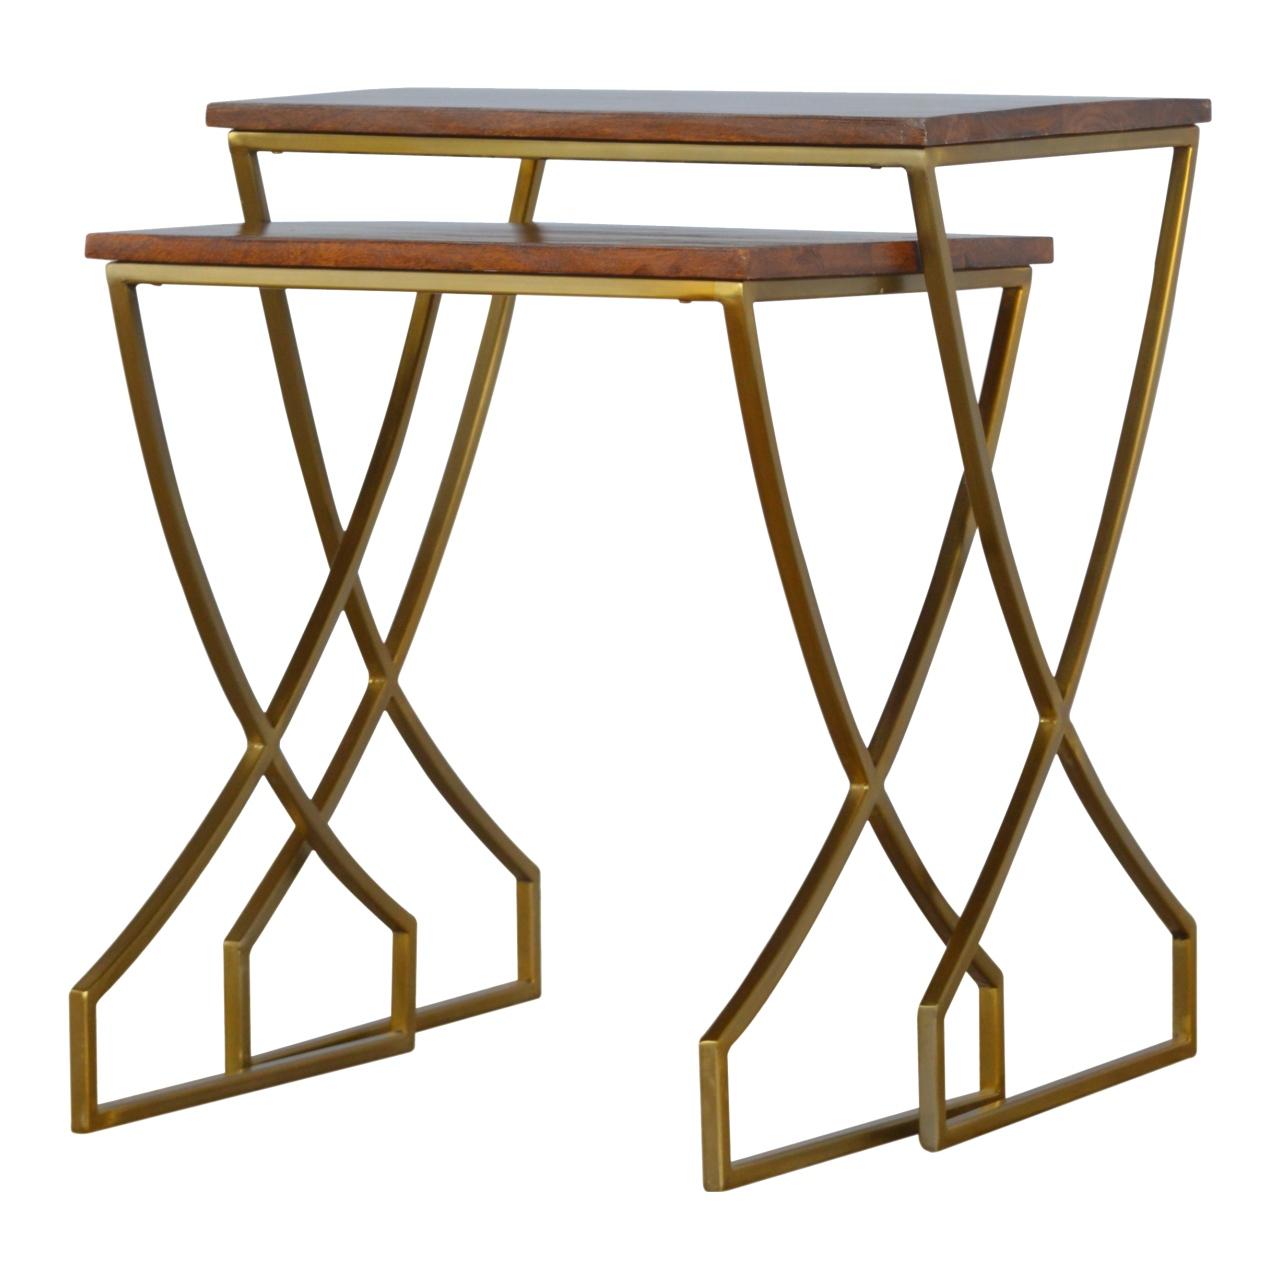 Set Of 2 Nesting Tables With Golden Base And Wooden Tops